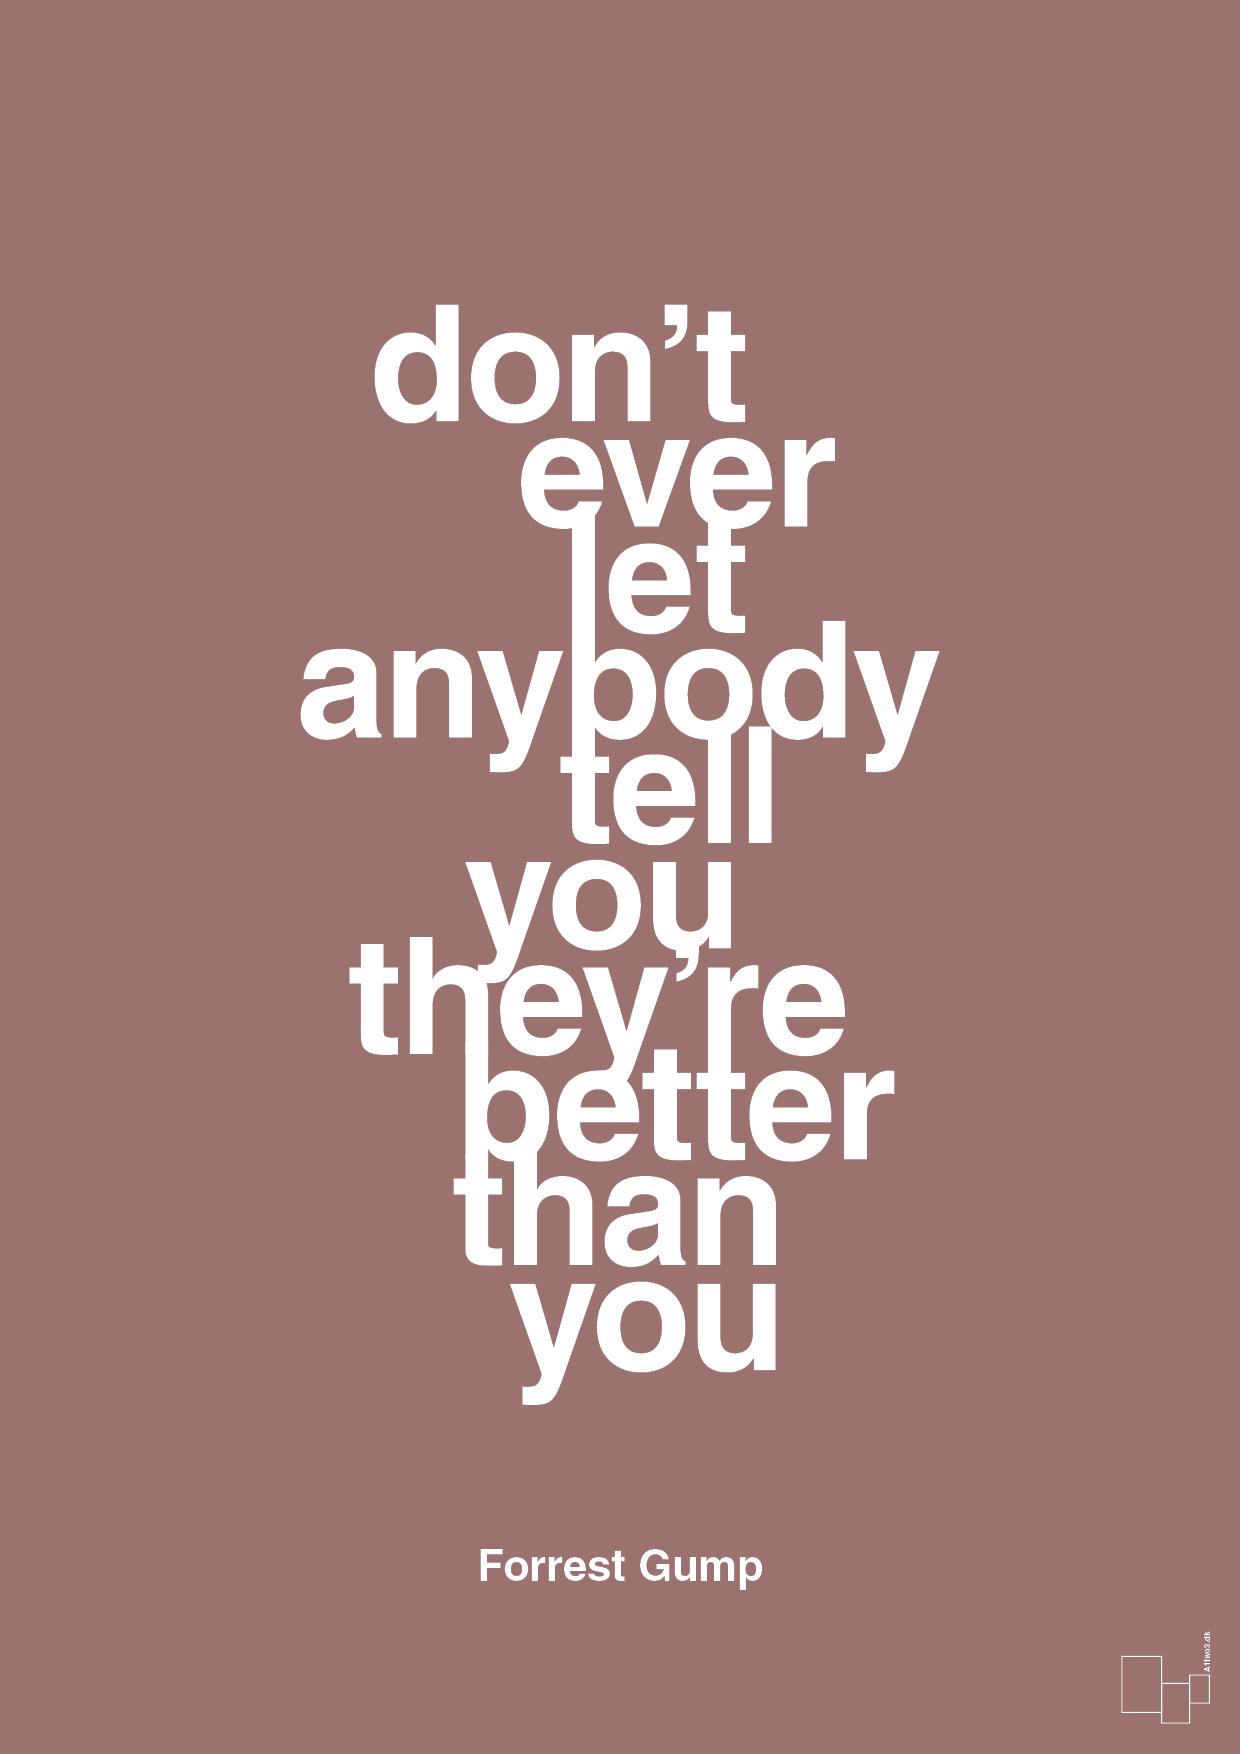 don’t ever let anybody tell you they’re better than you - Plakat med Citater i Plum